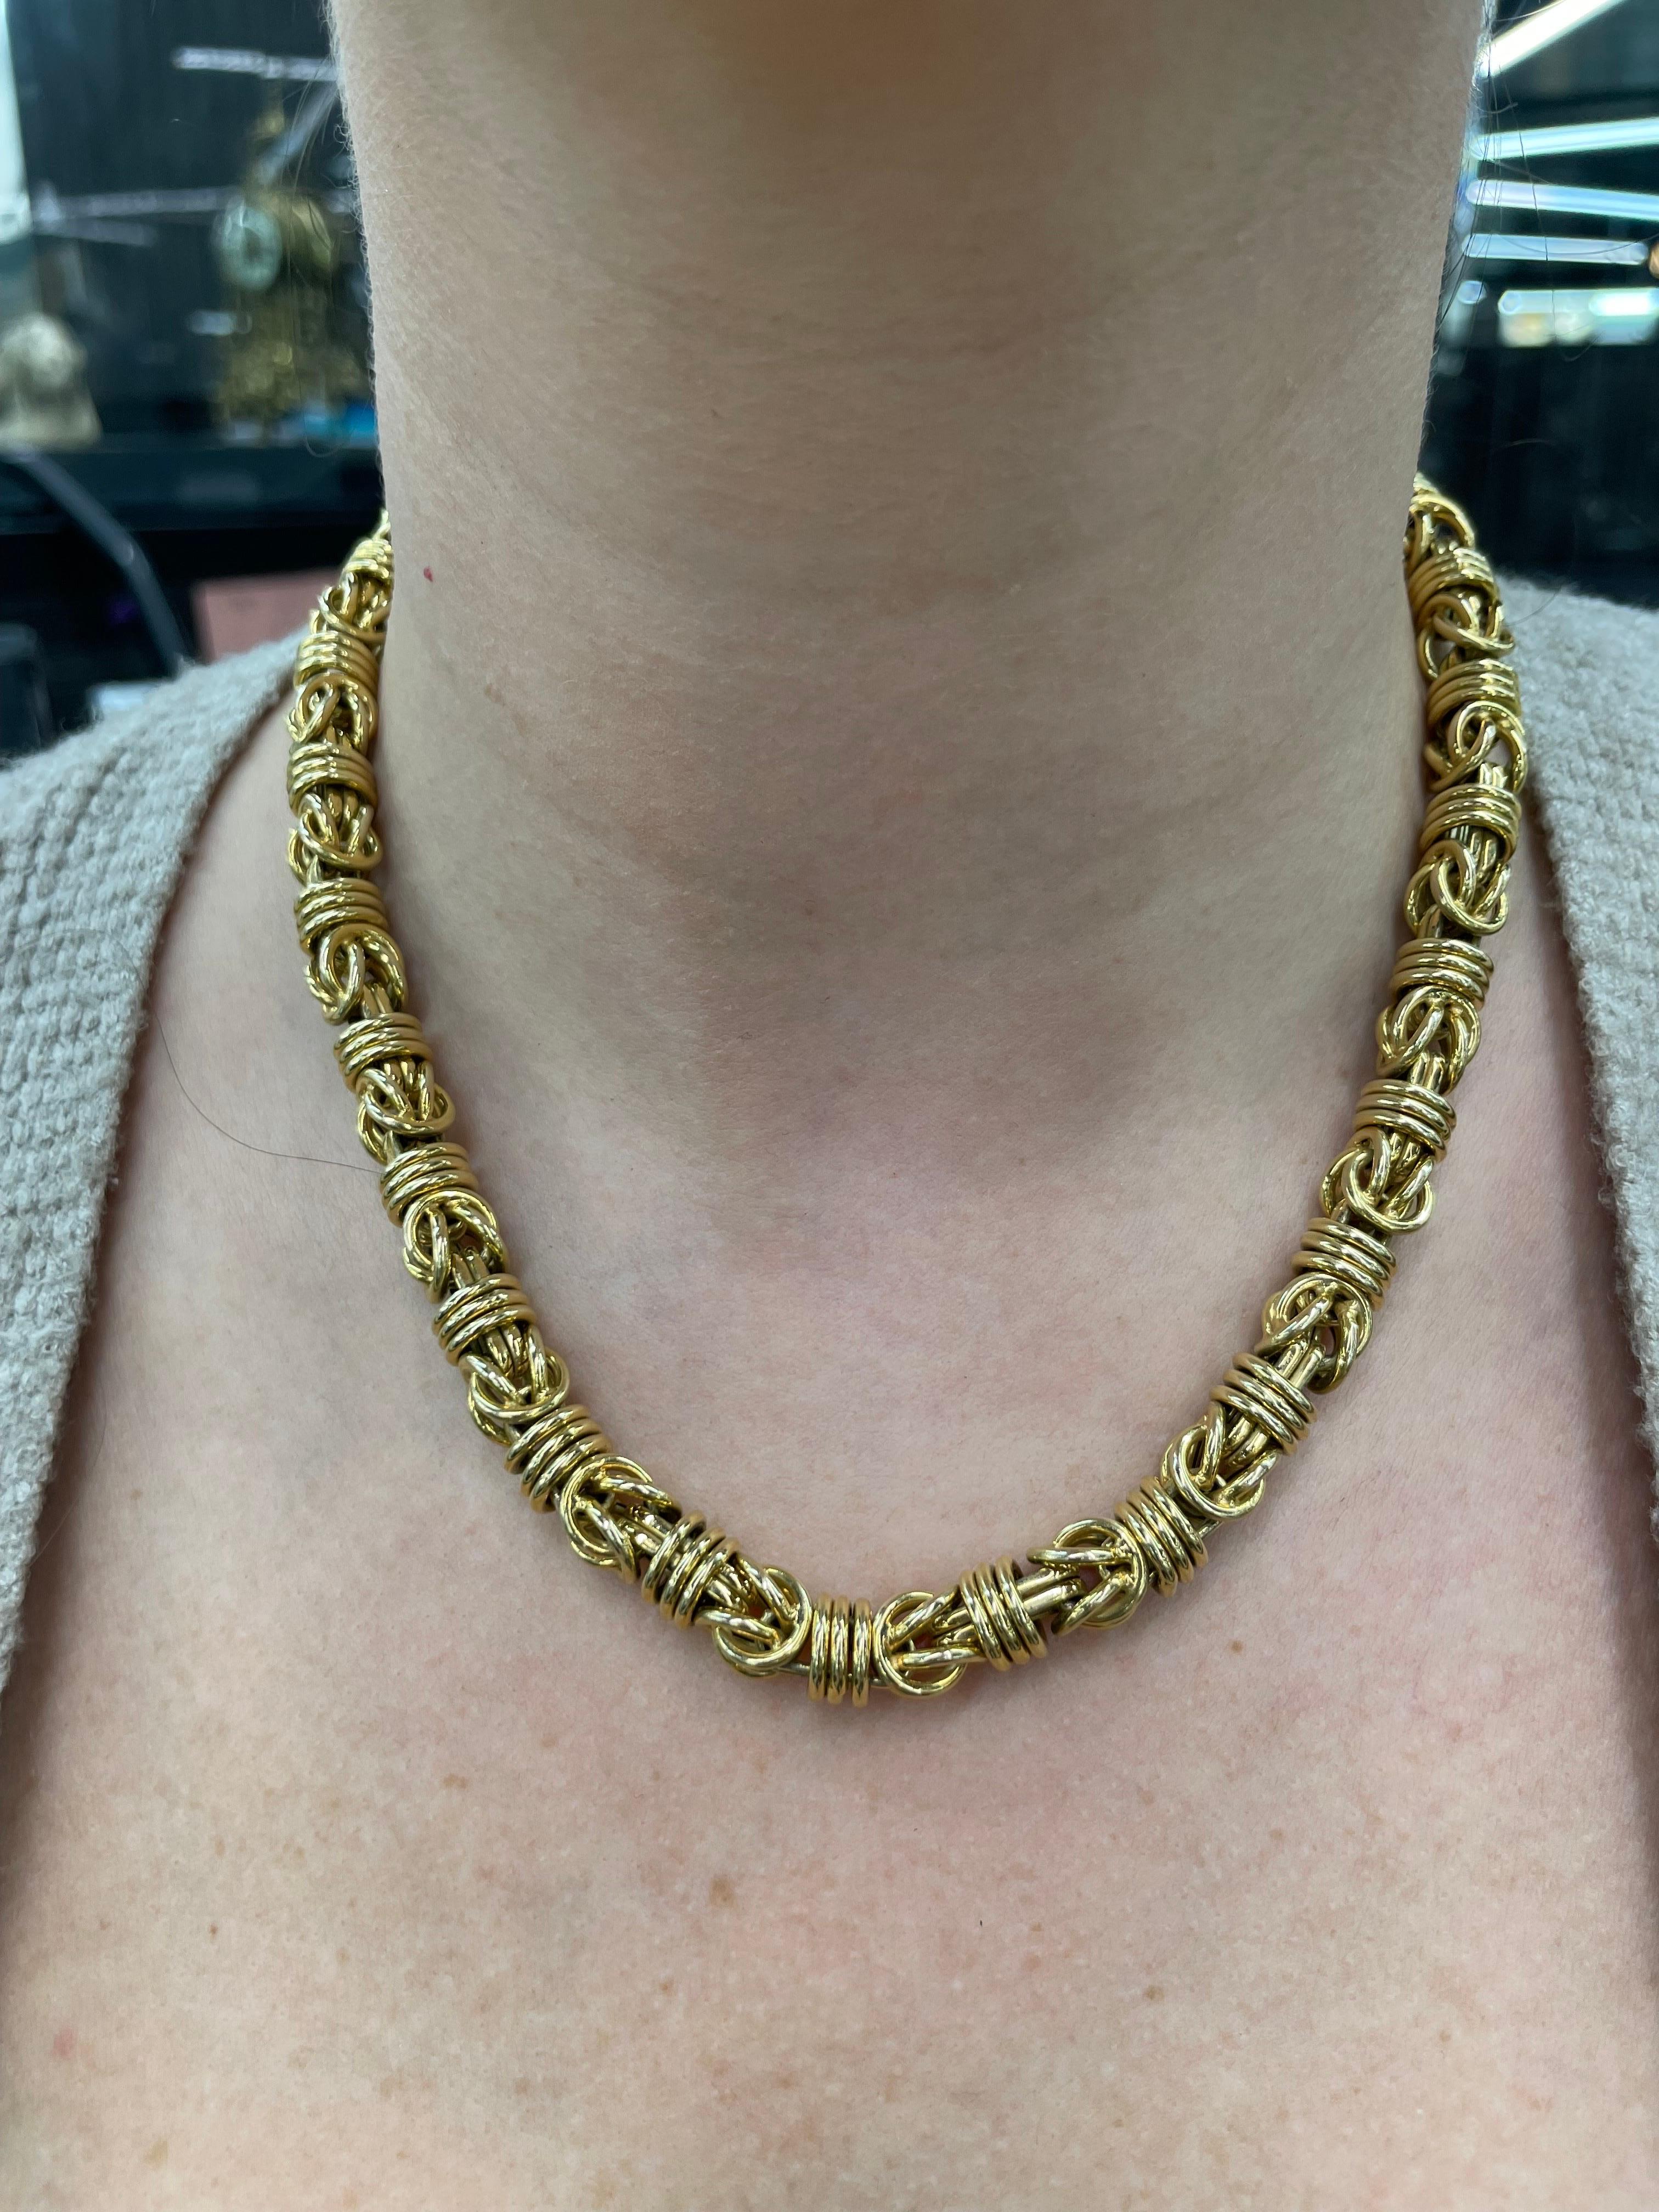 14 Karat Yellow Gold Byzantine Wide Necklace 70 Grams 18.5 Inches Made In Italy For Sale 1